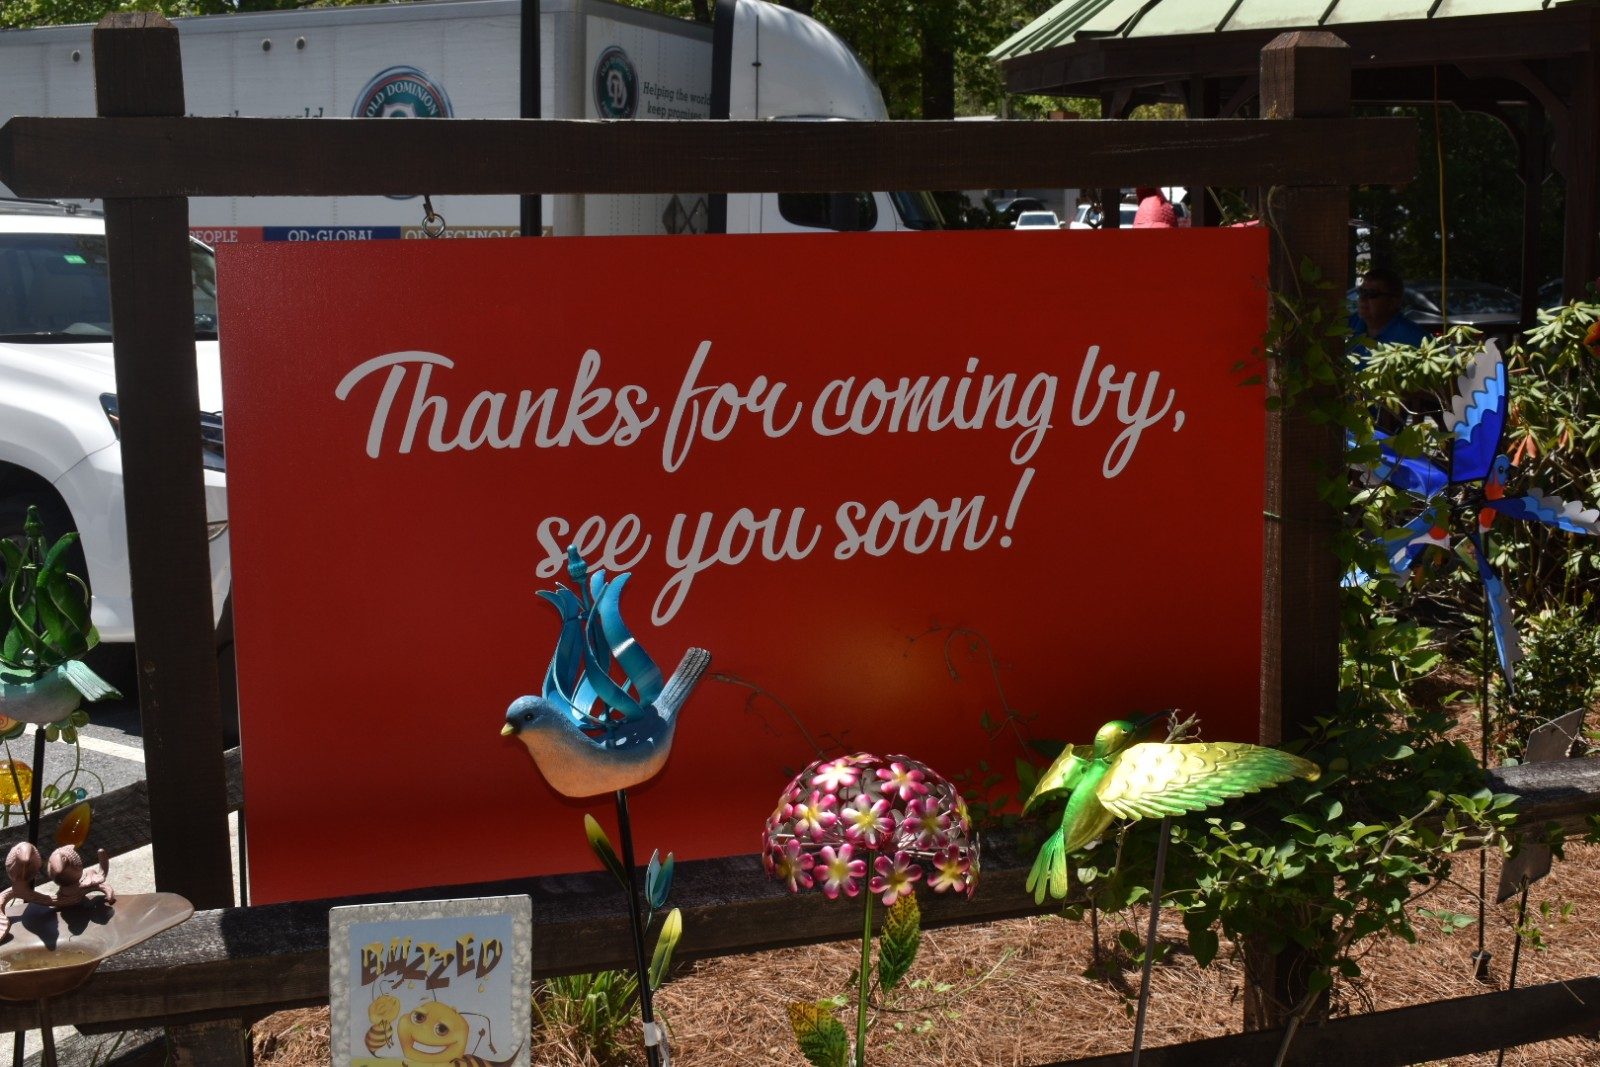 A large display sign at the exit of the garden store which says, "Thanks for coming by, see you soon!"